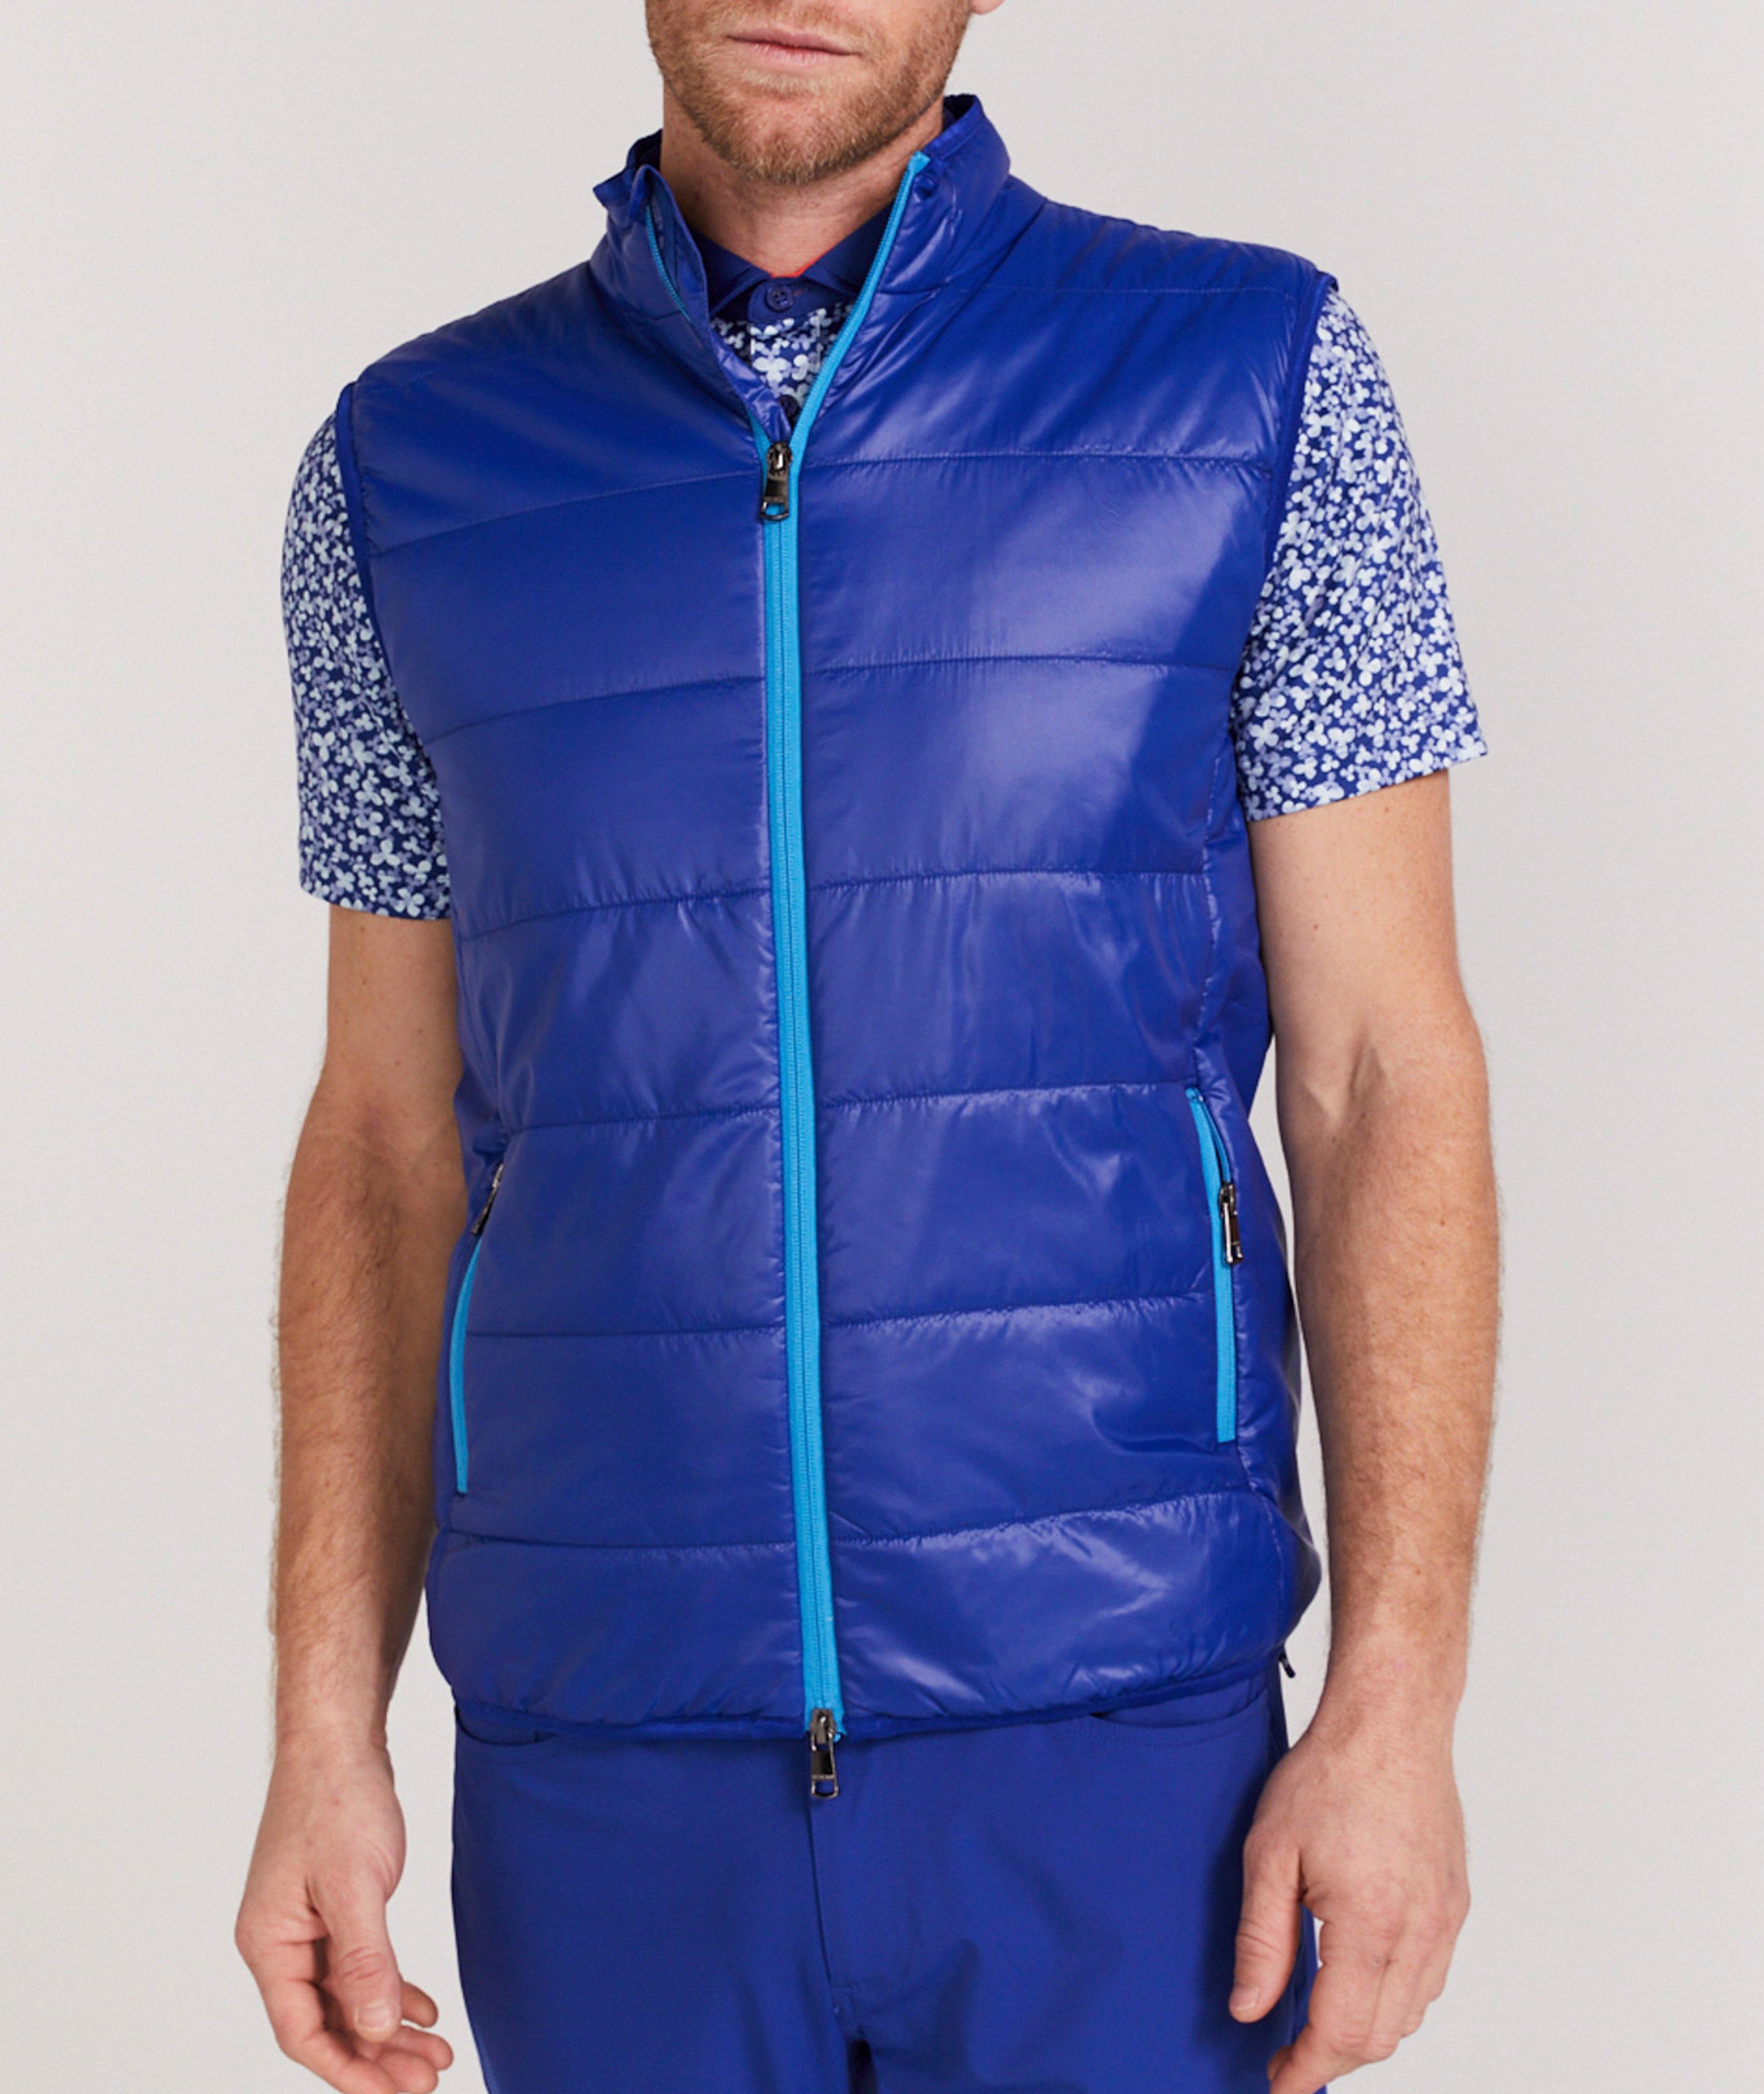 Bolton Quilted Technical Fabric Vest image 1